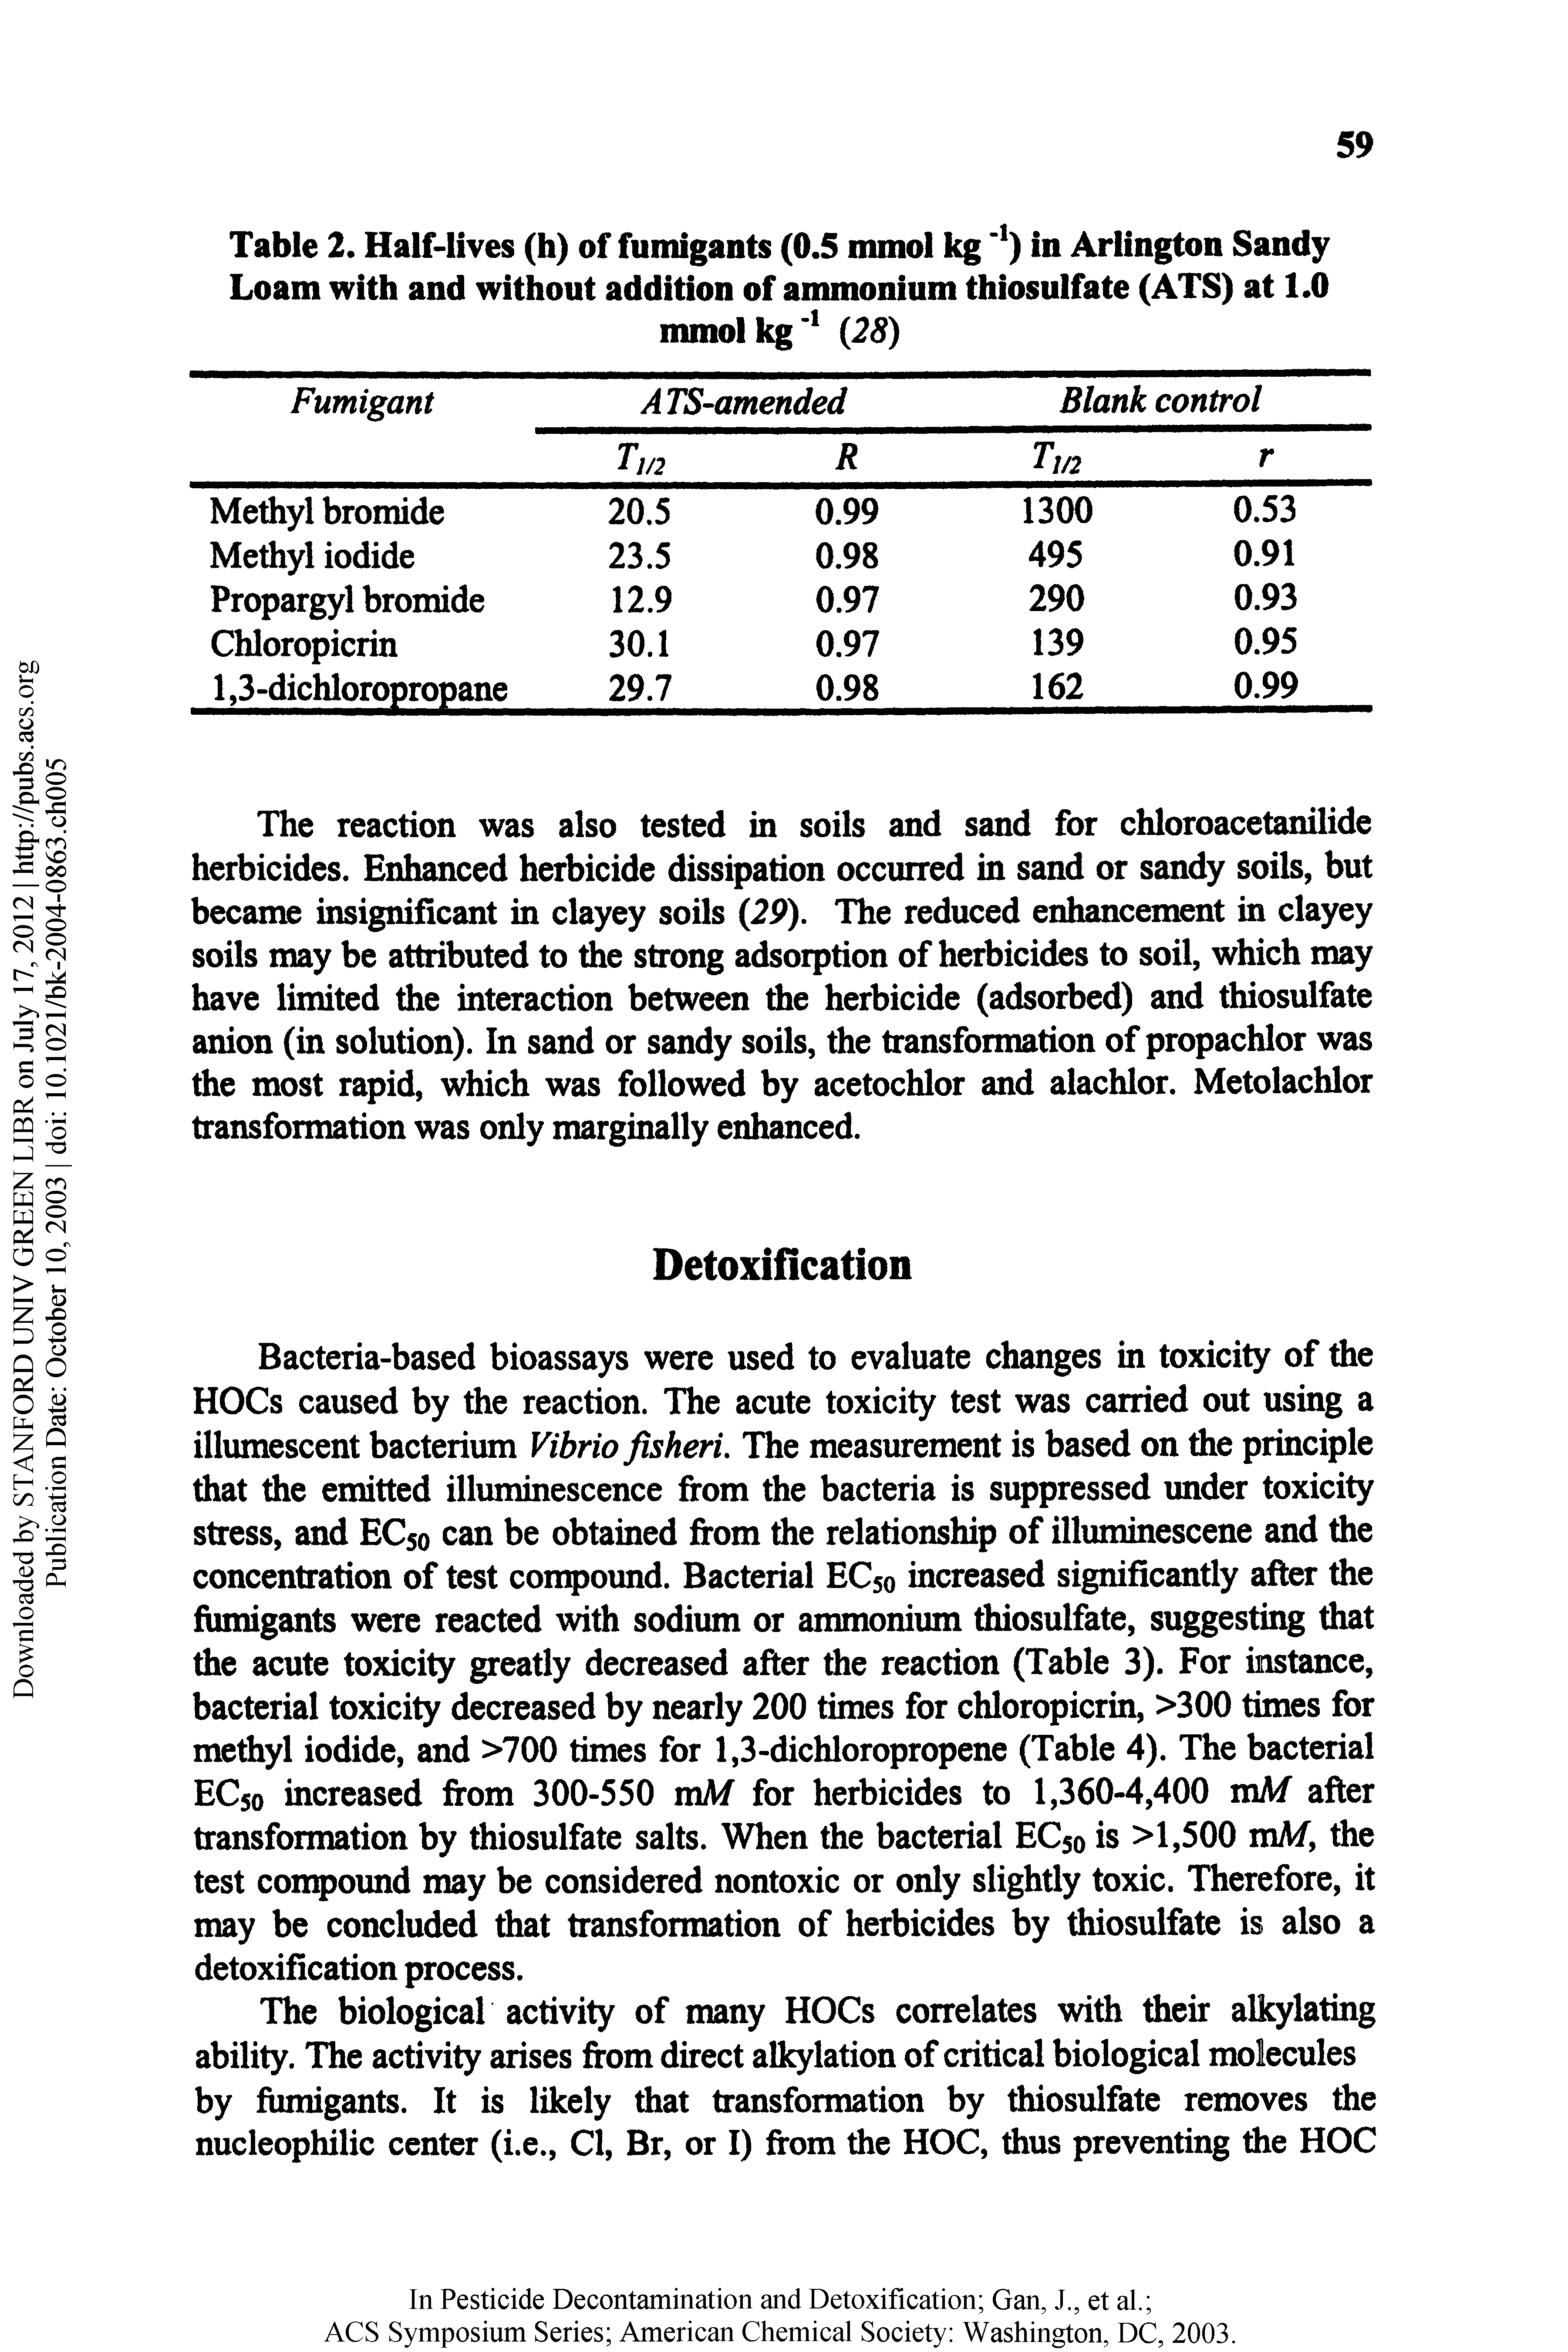 Table 2. Half-lives (h) of fumigants (0.5 mmol kg ) in Arlington Sandy Loam with and without addition of ammonium thiosulfate (ATS) at 1.0...